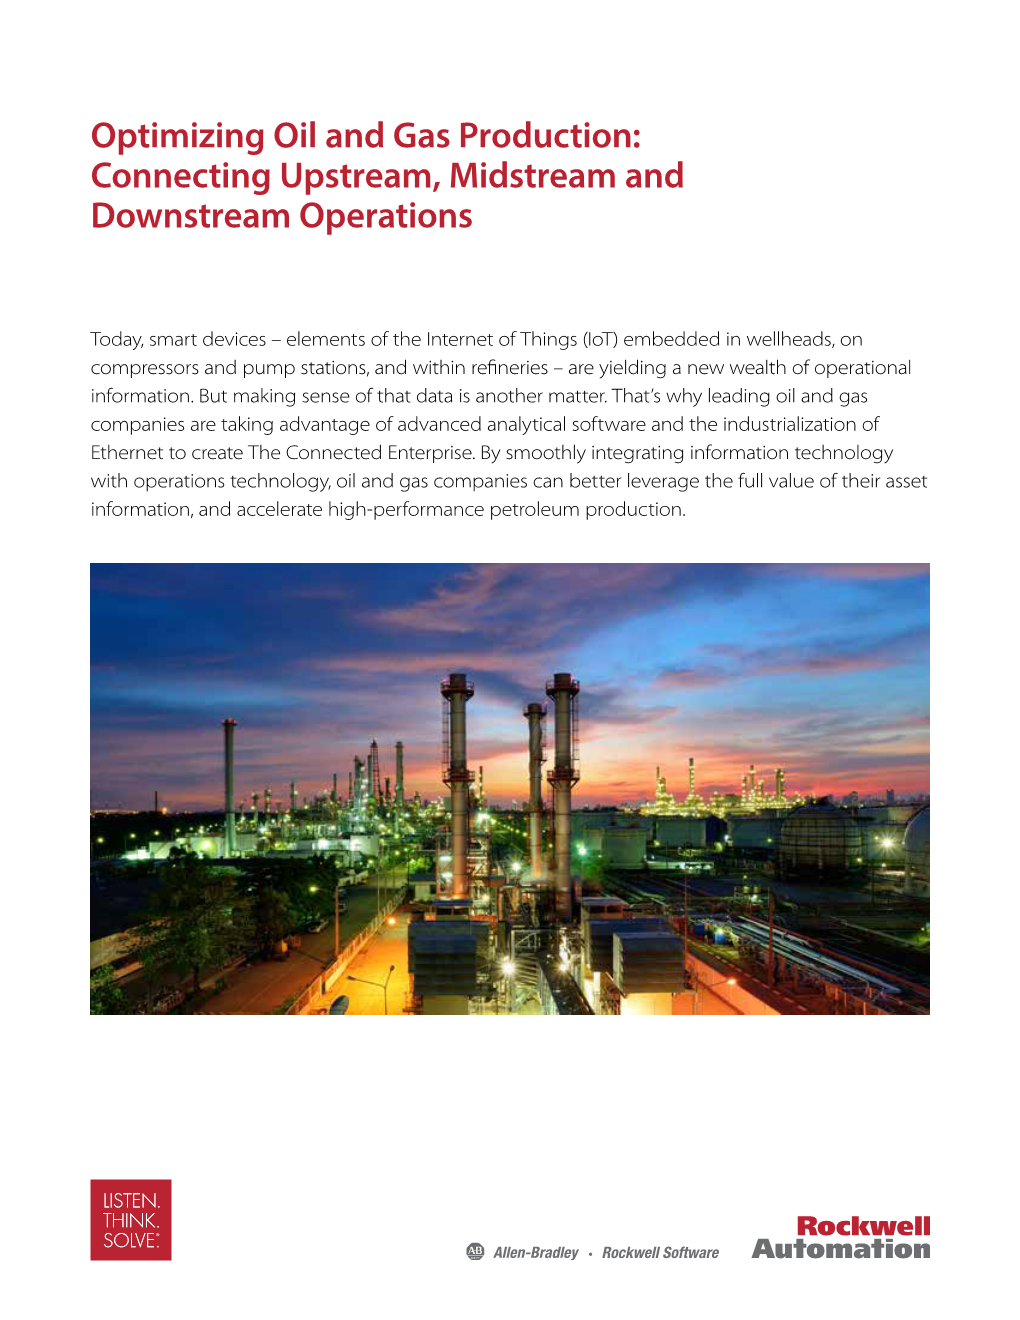 Optimizing Oil and Gas Production: Connecting Upstream, Midstream and Downstream Operations